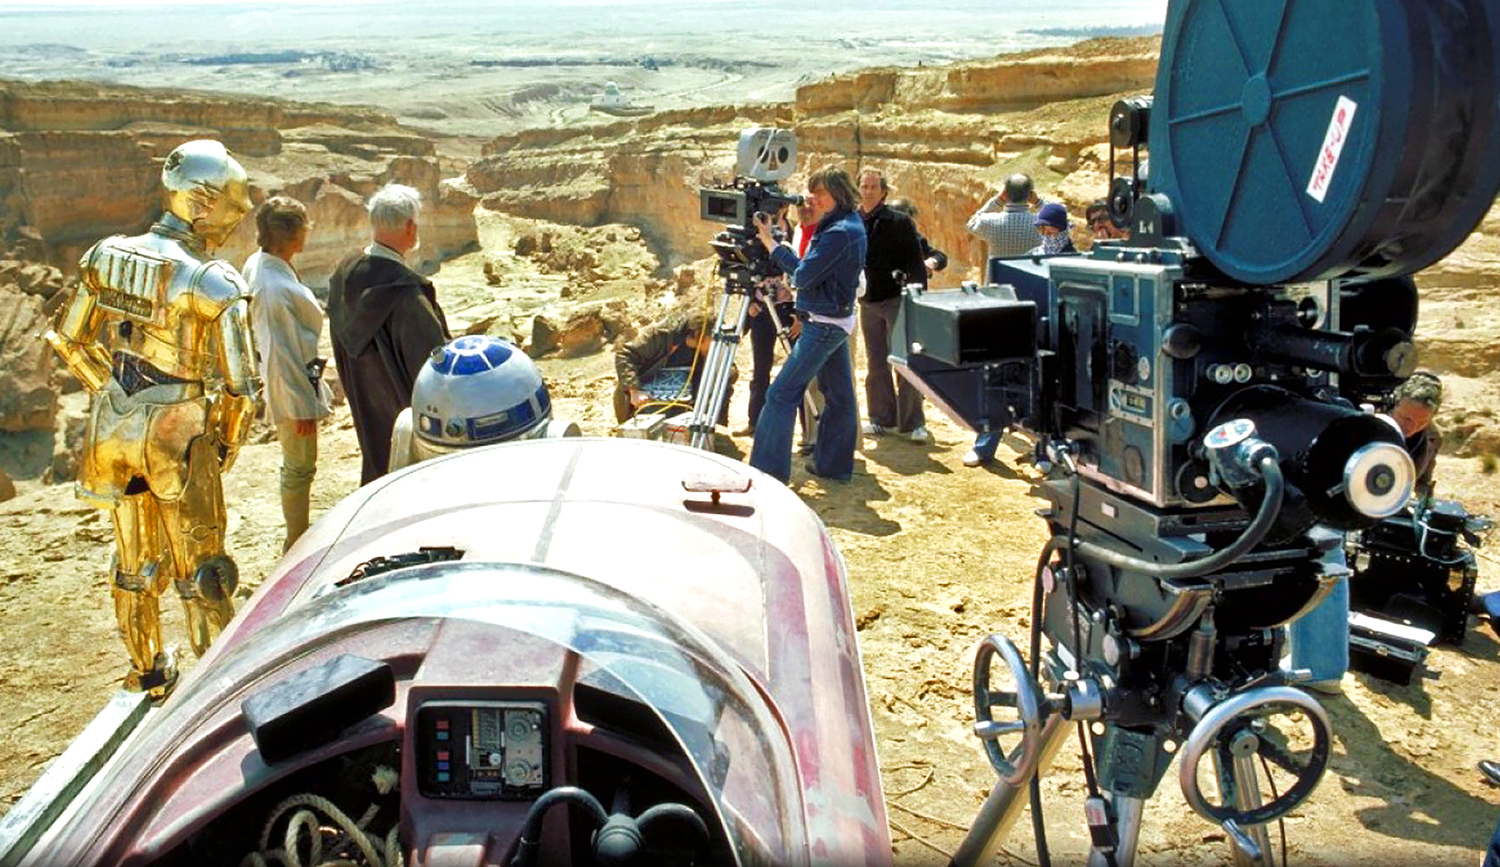 Behind the scenes of Star Wars IV, several characters stand in front of a camera at a remote canyon location.